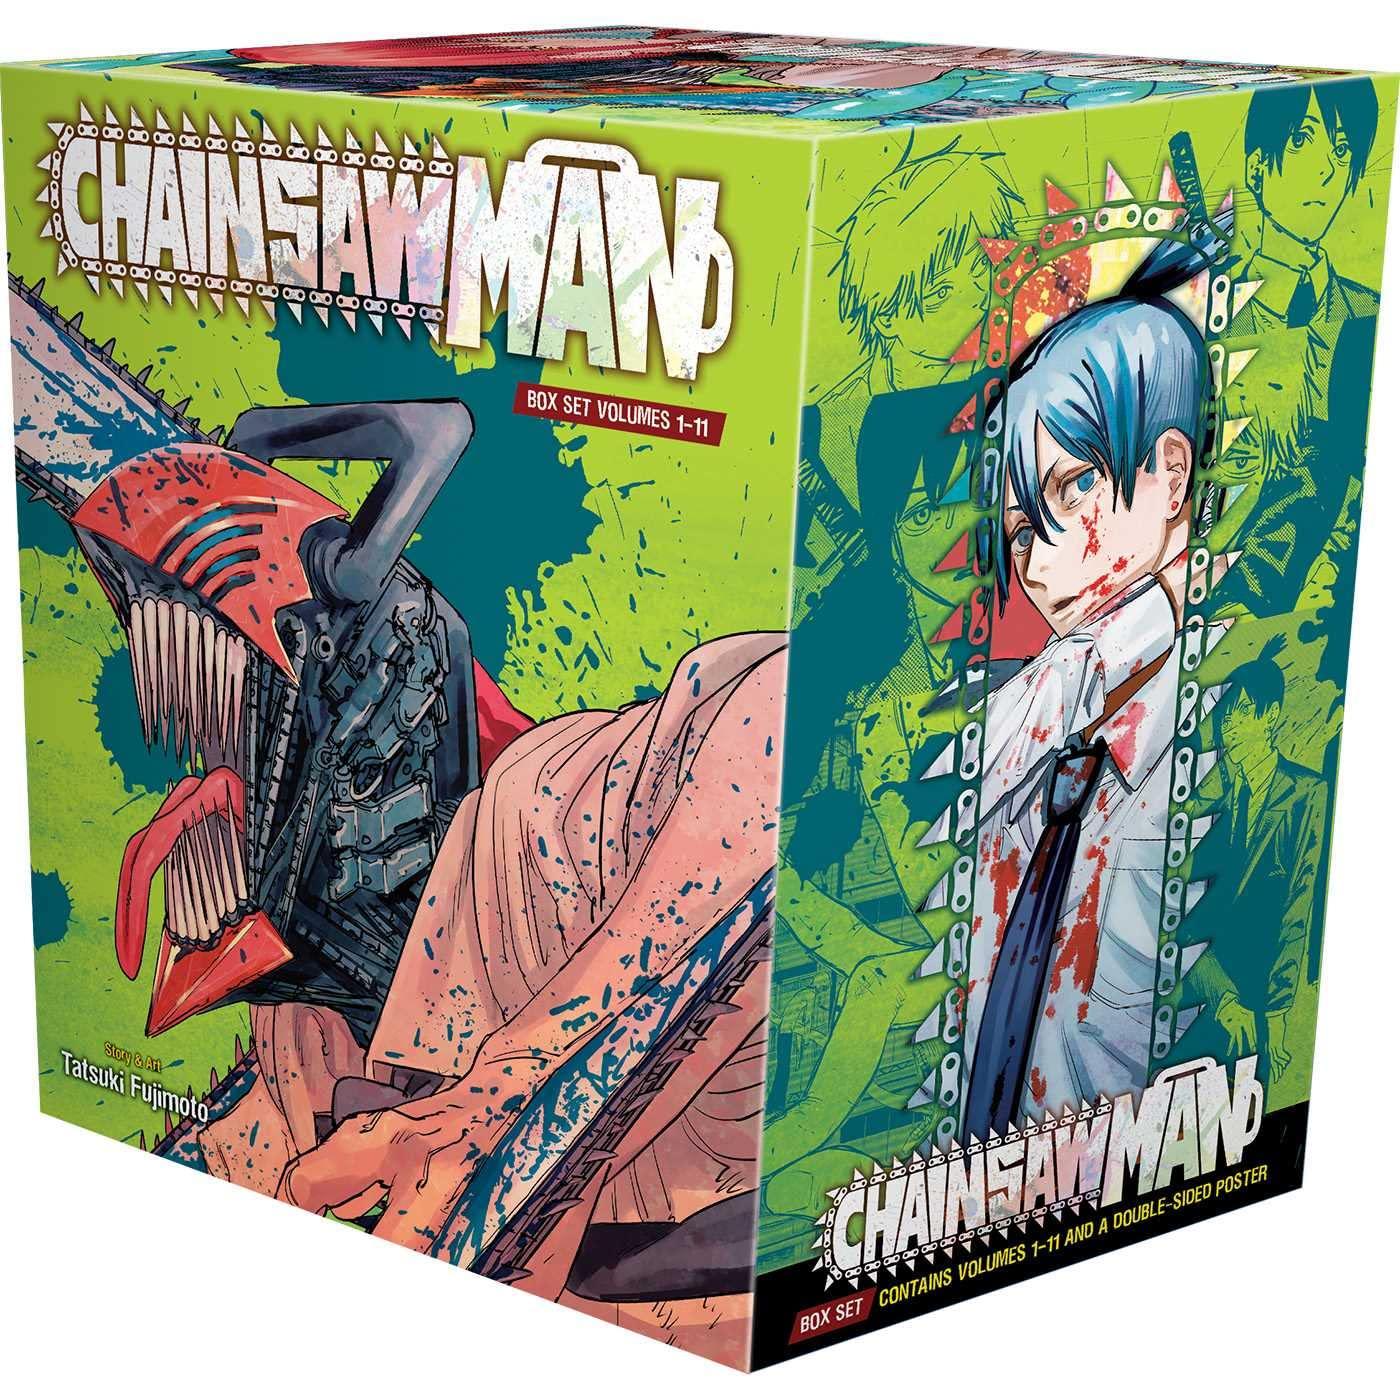 Chainsaw Man Volumes 1-11 Paperback Box Set for $47.99 Shipped